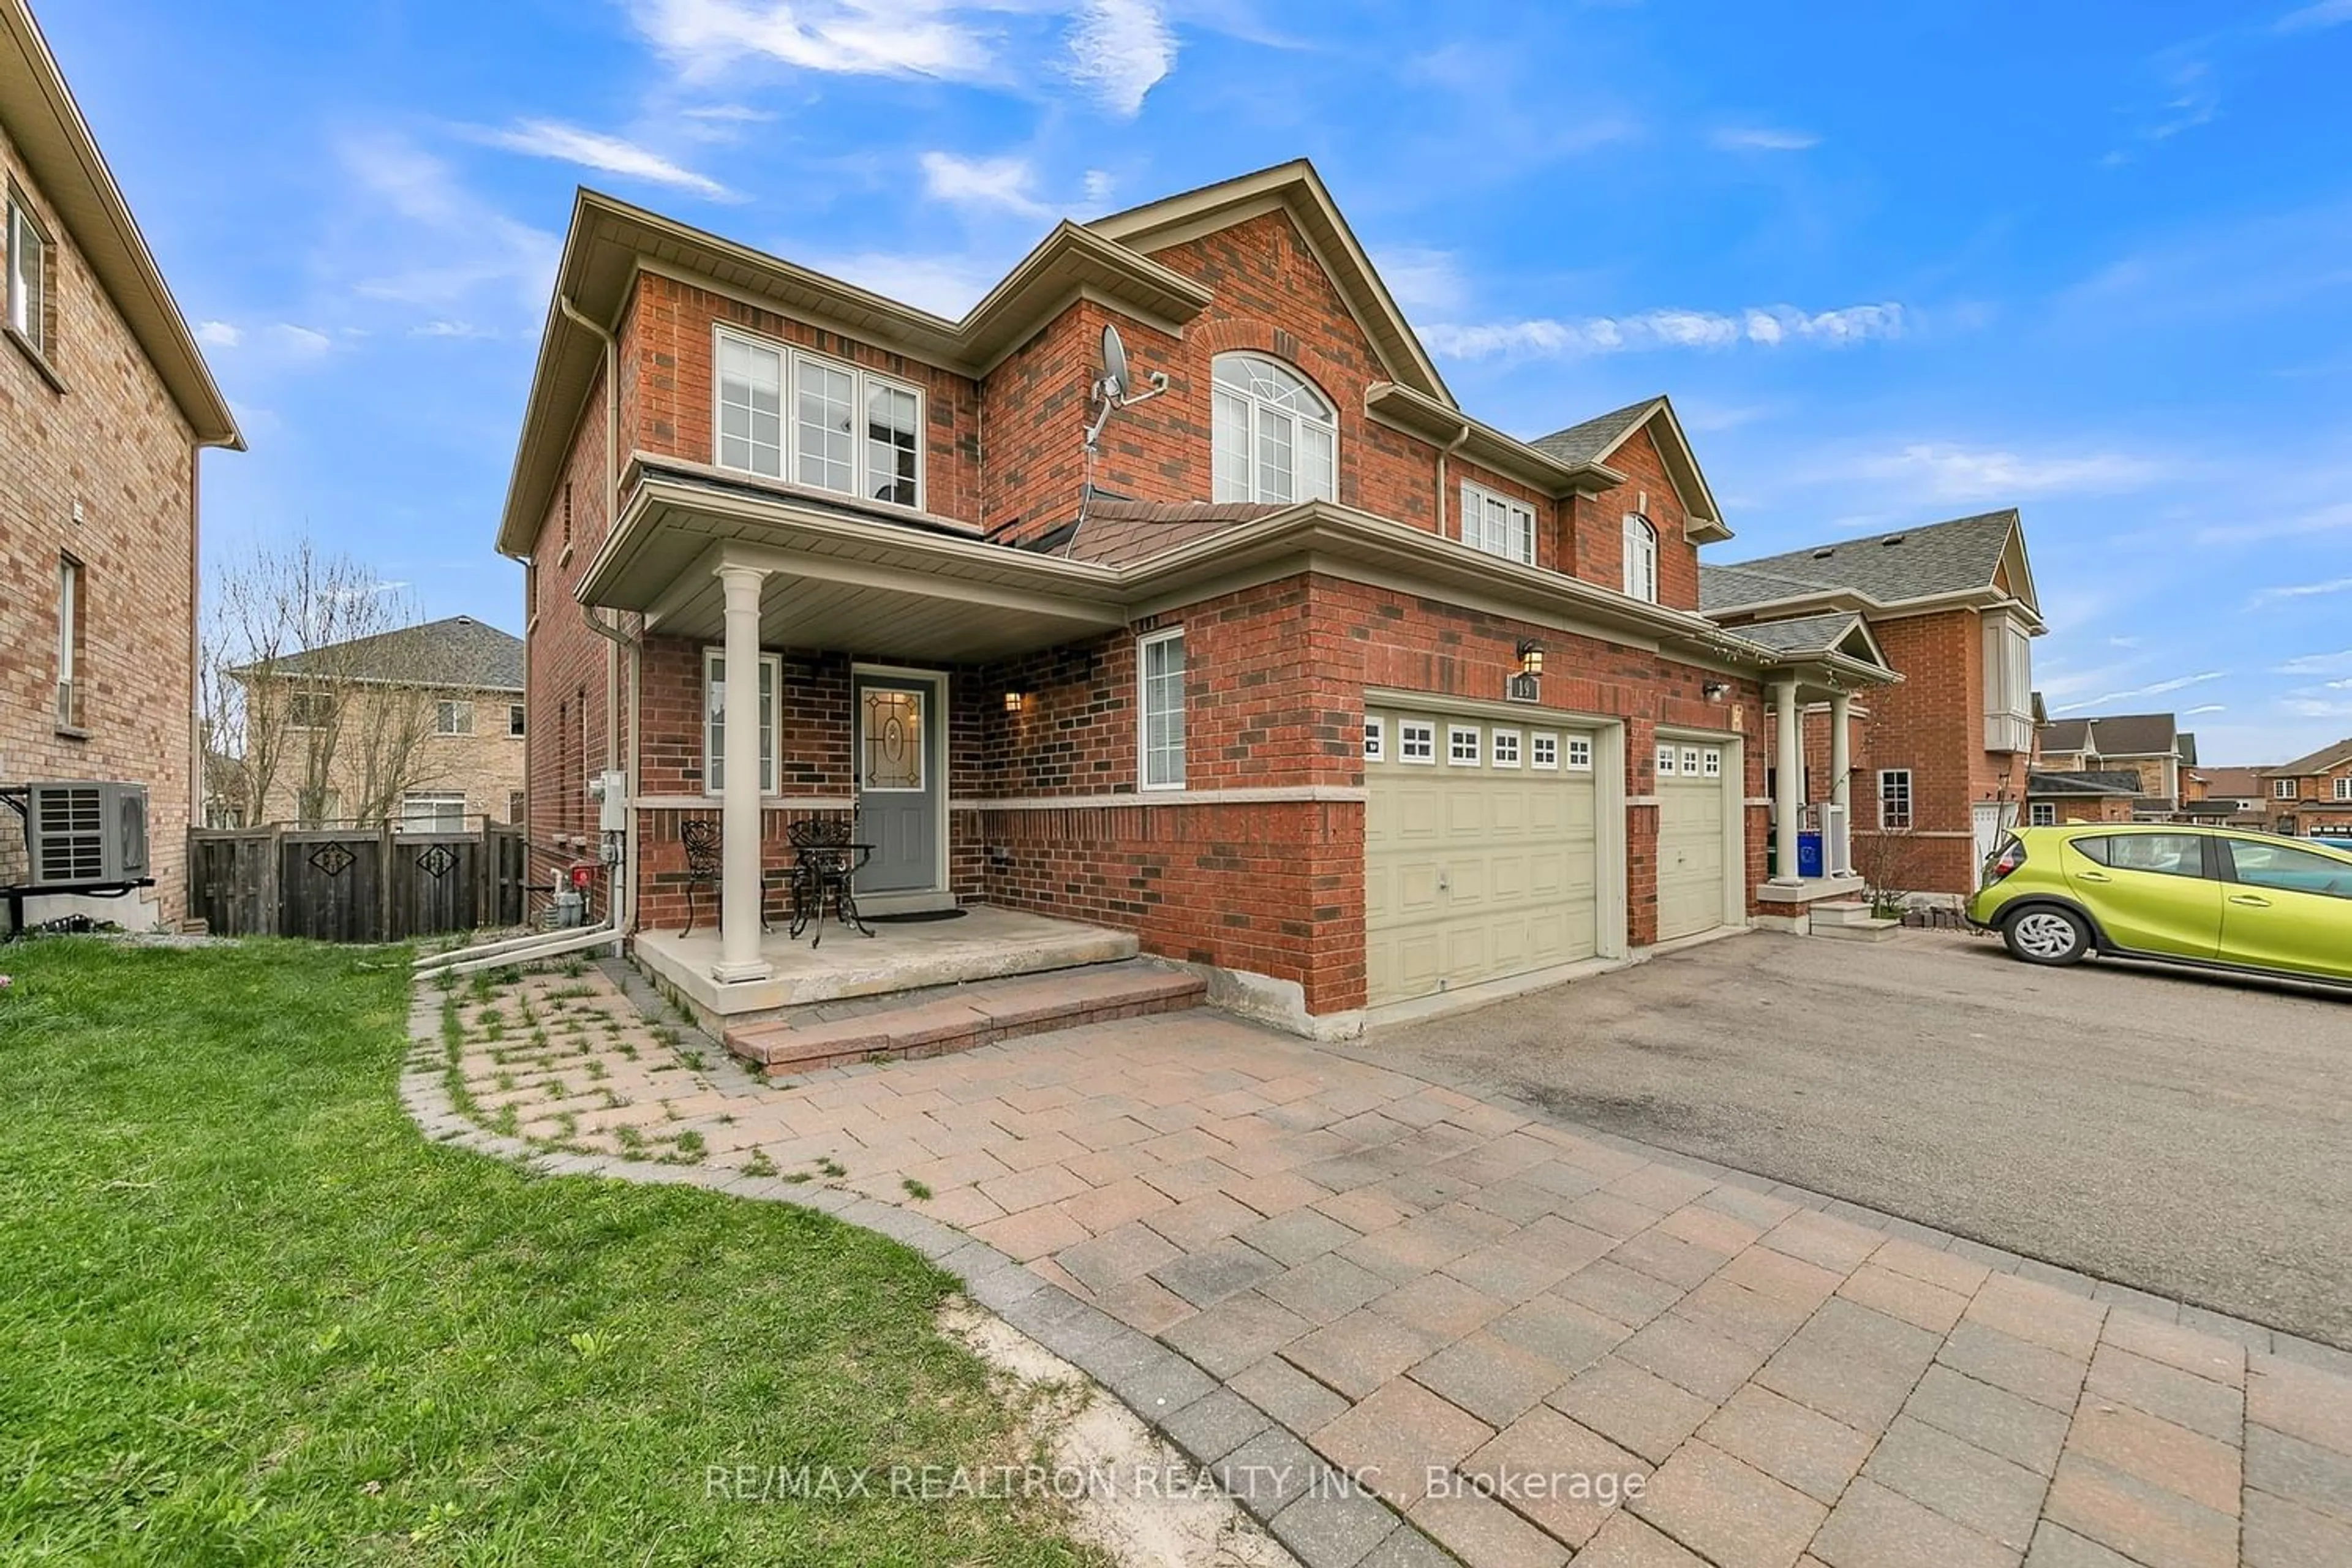 Home with brick exterior material for 19 Maffey Cres, Richmond Hill Ontario L4S 0A7